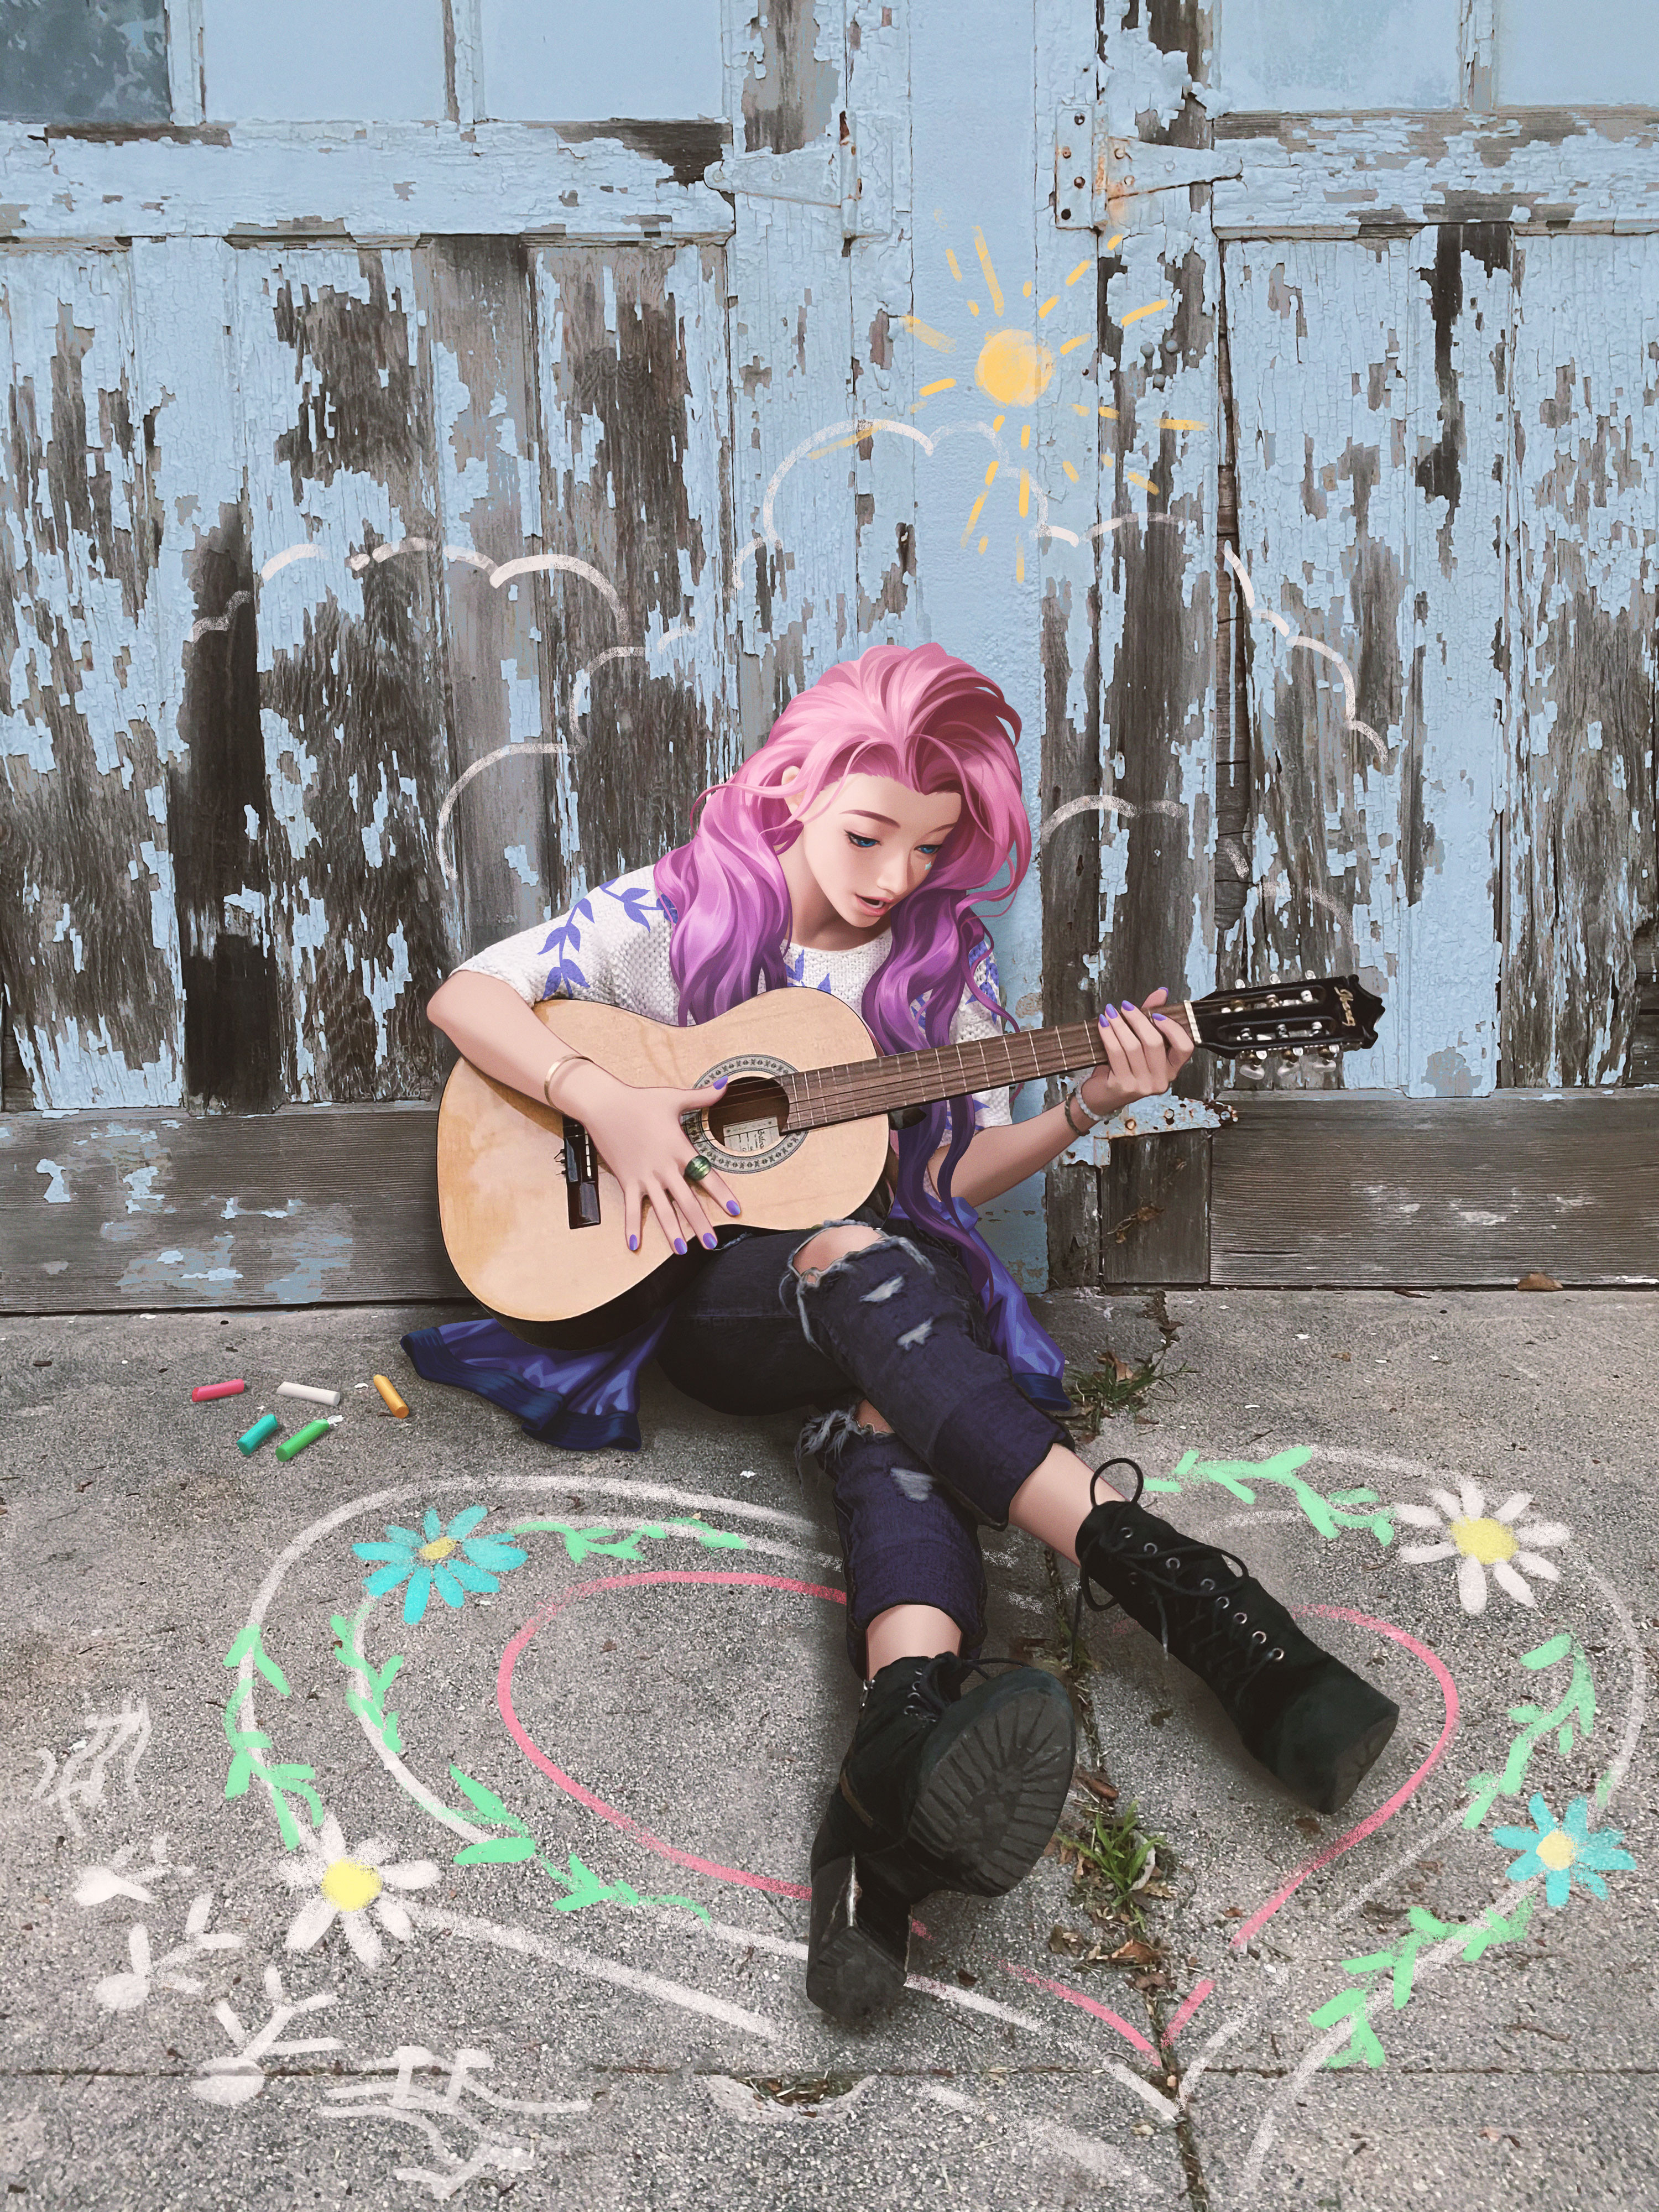 Anime Girls Artwork Digital Art Digital Painting Women Young Woman On The Ground Guitar On The Floor 3000x4000